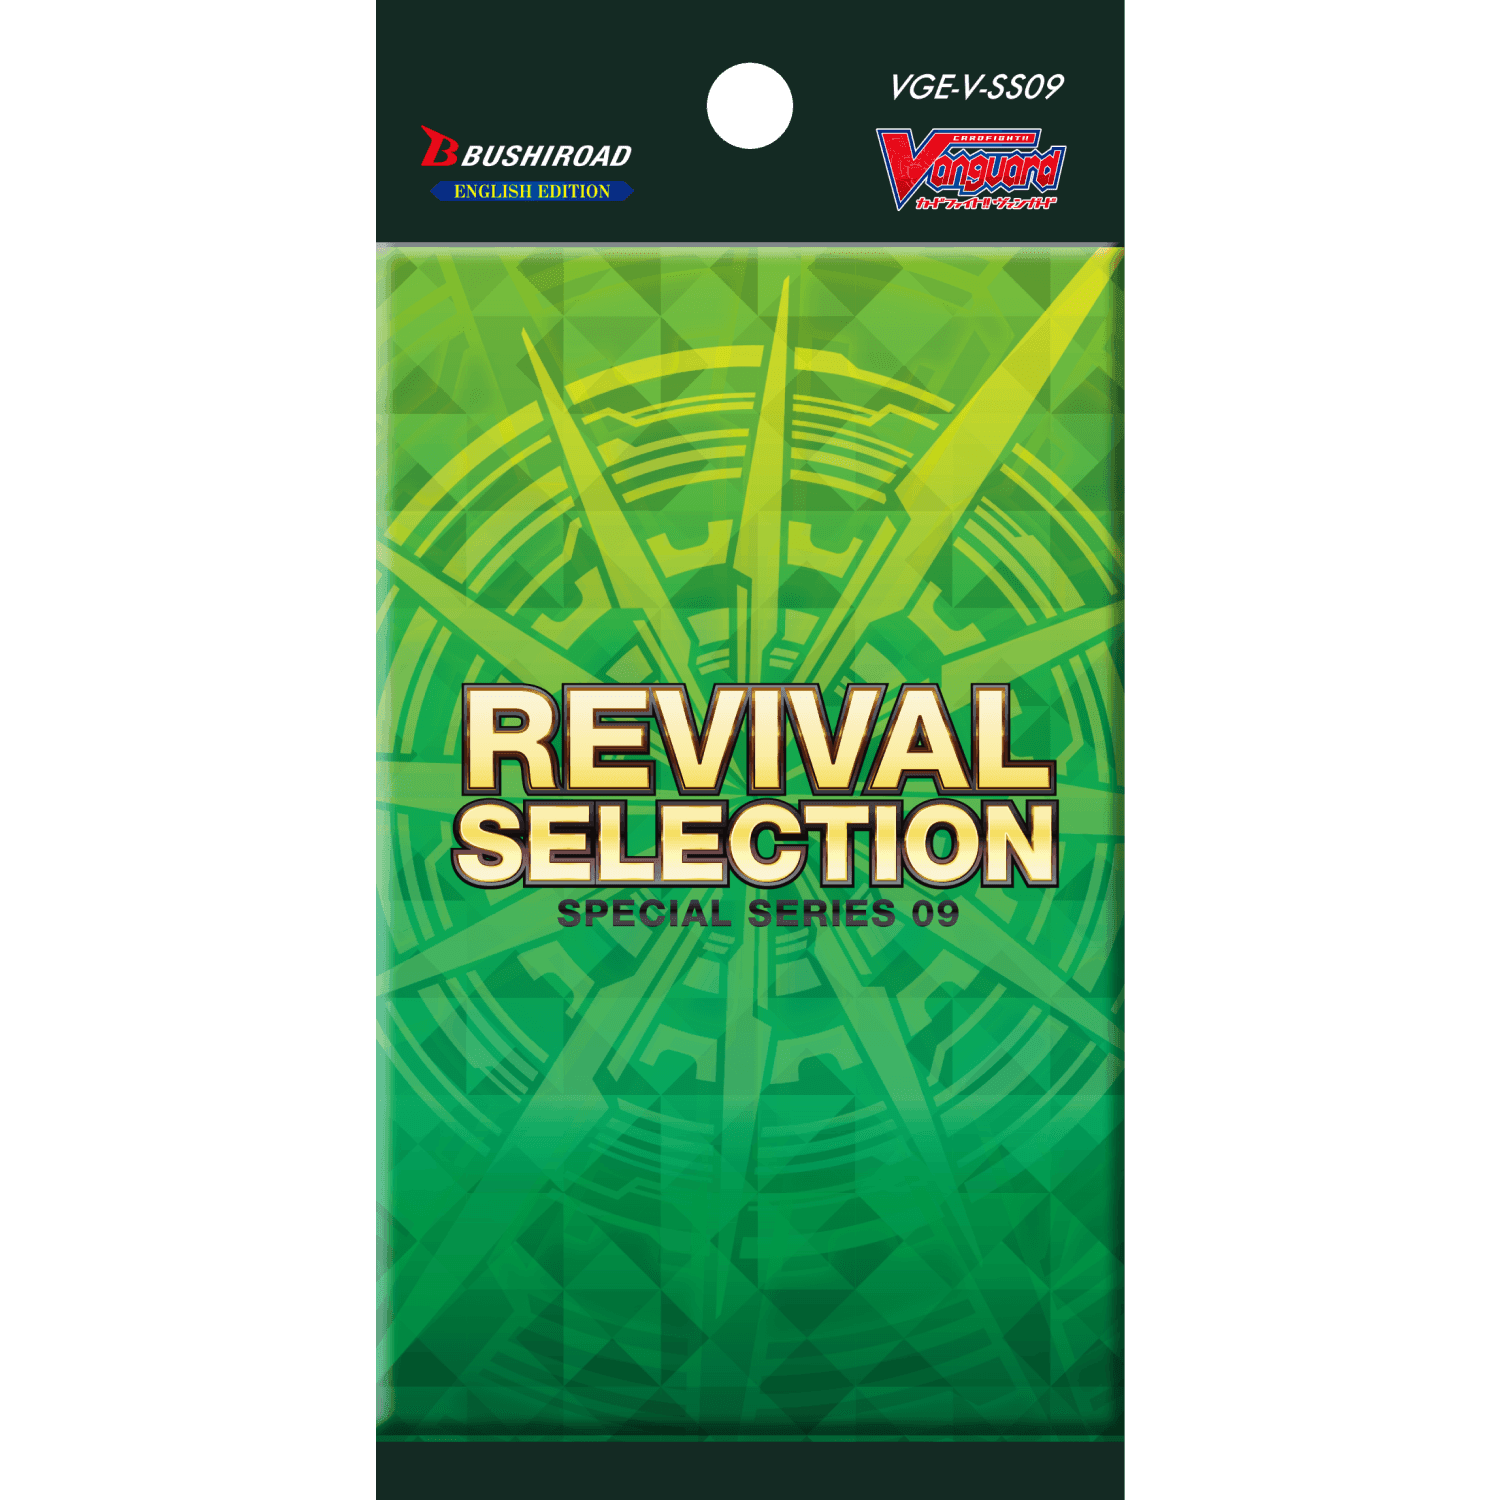 Cardfight!! Vanguard - Special Series 09 Revival Selection Booster Pack - The Card Vault